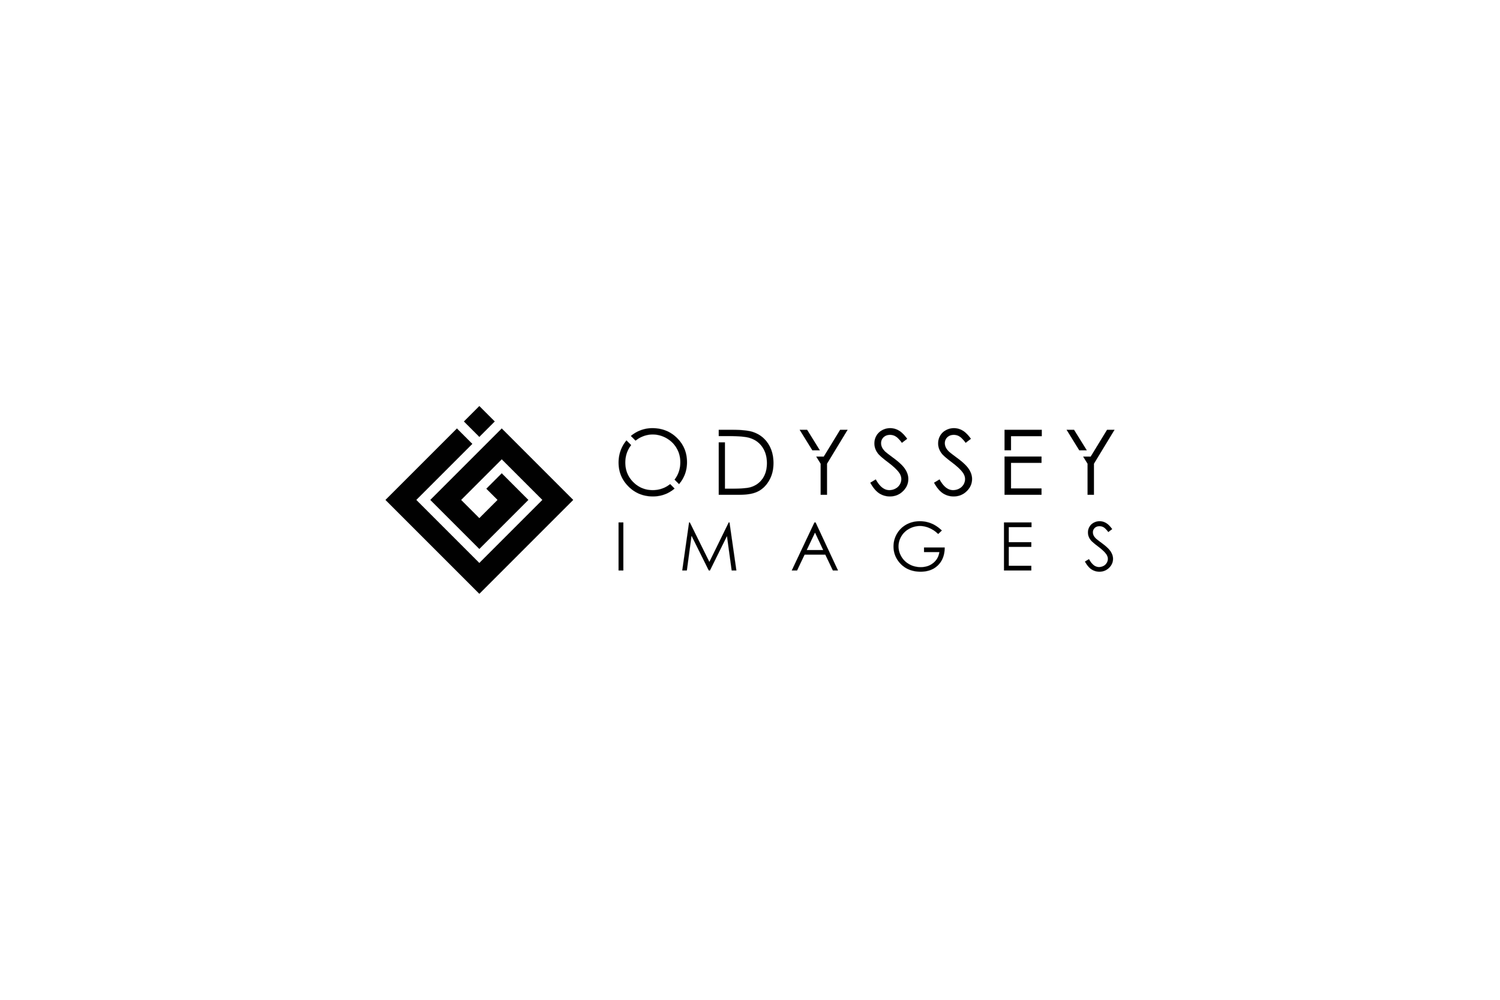 Odyssey Images